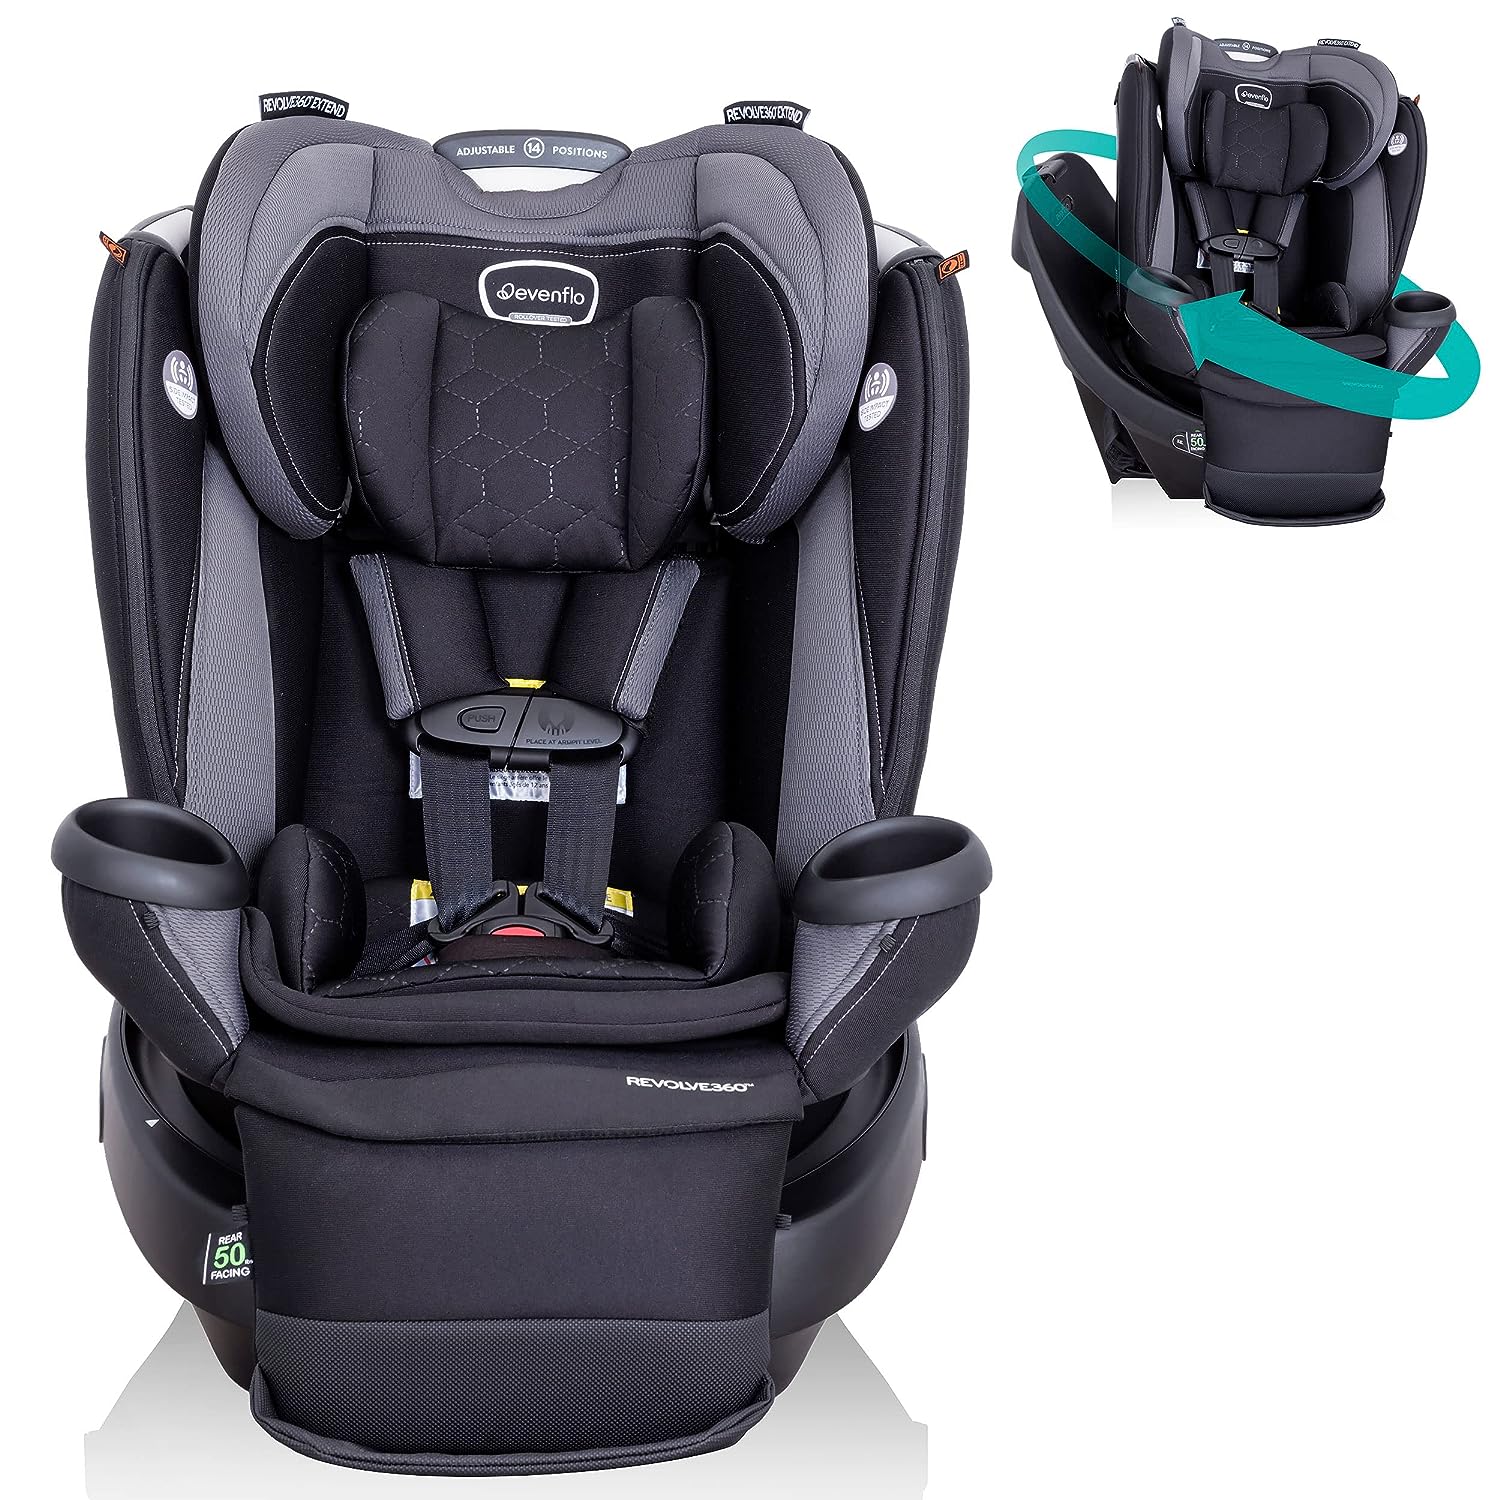 Amazon: Evenflo Revolve360 Extend All-in-One Rotational Car Seat with Quick Clean Cover (Revere Gray) $279.99